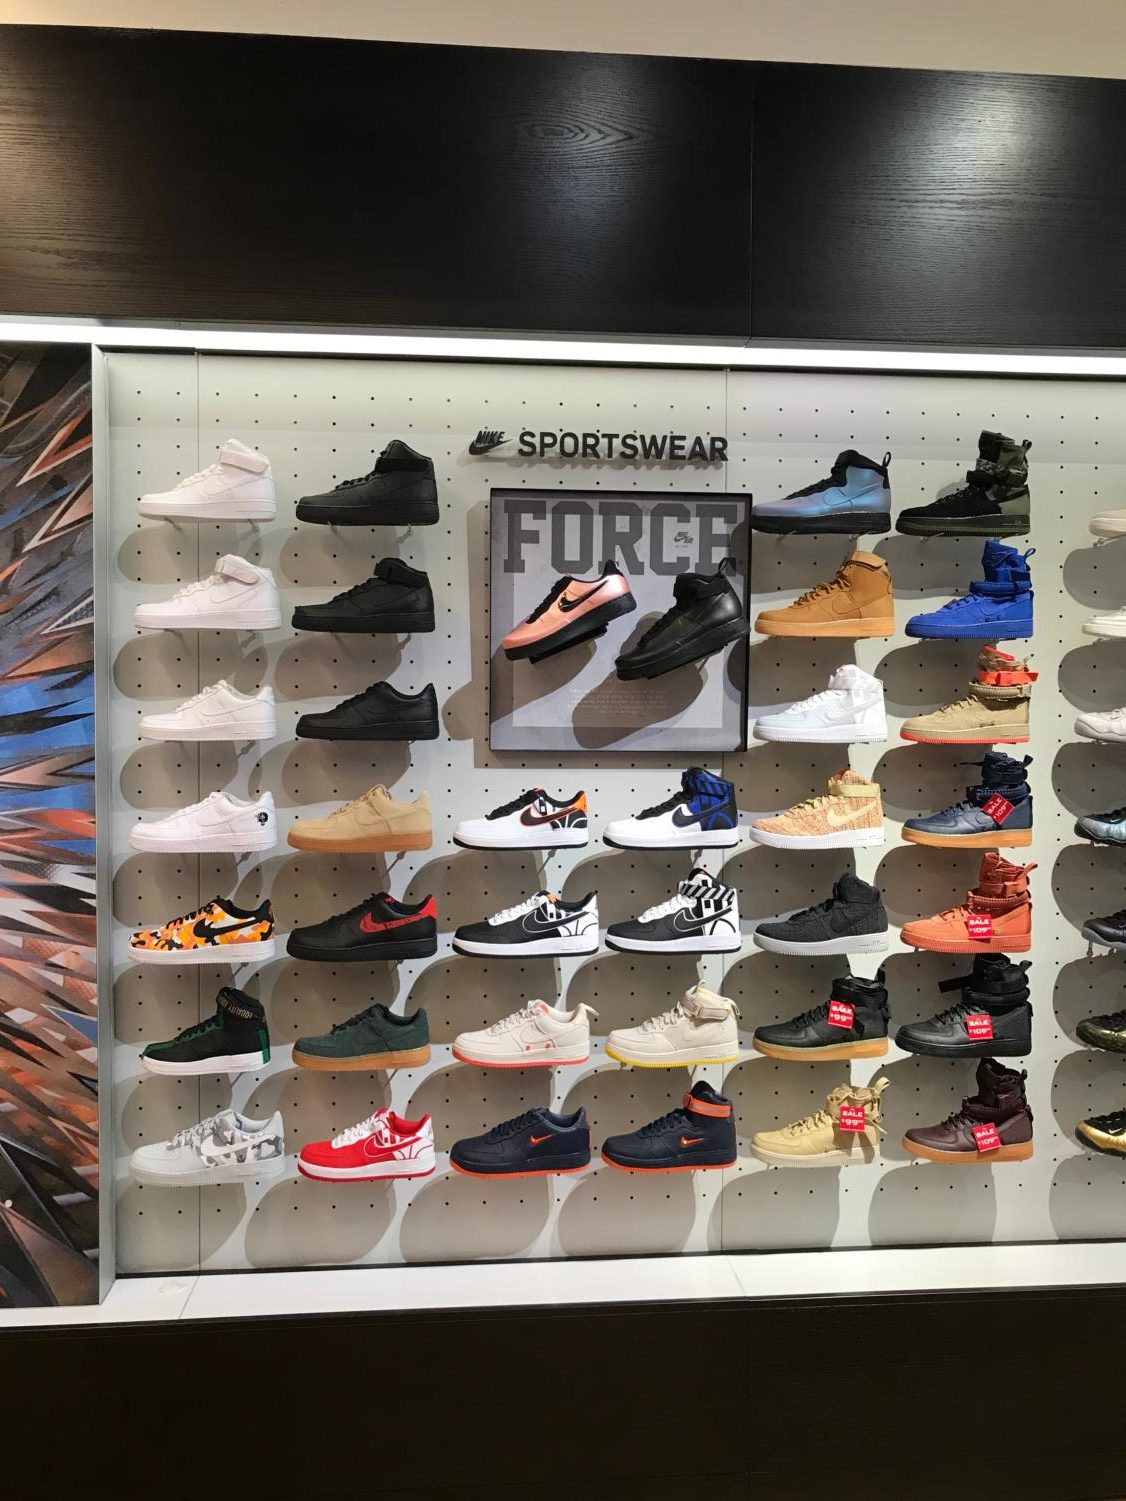 What kind of sneakers are on your feet? – The iNews Network